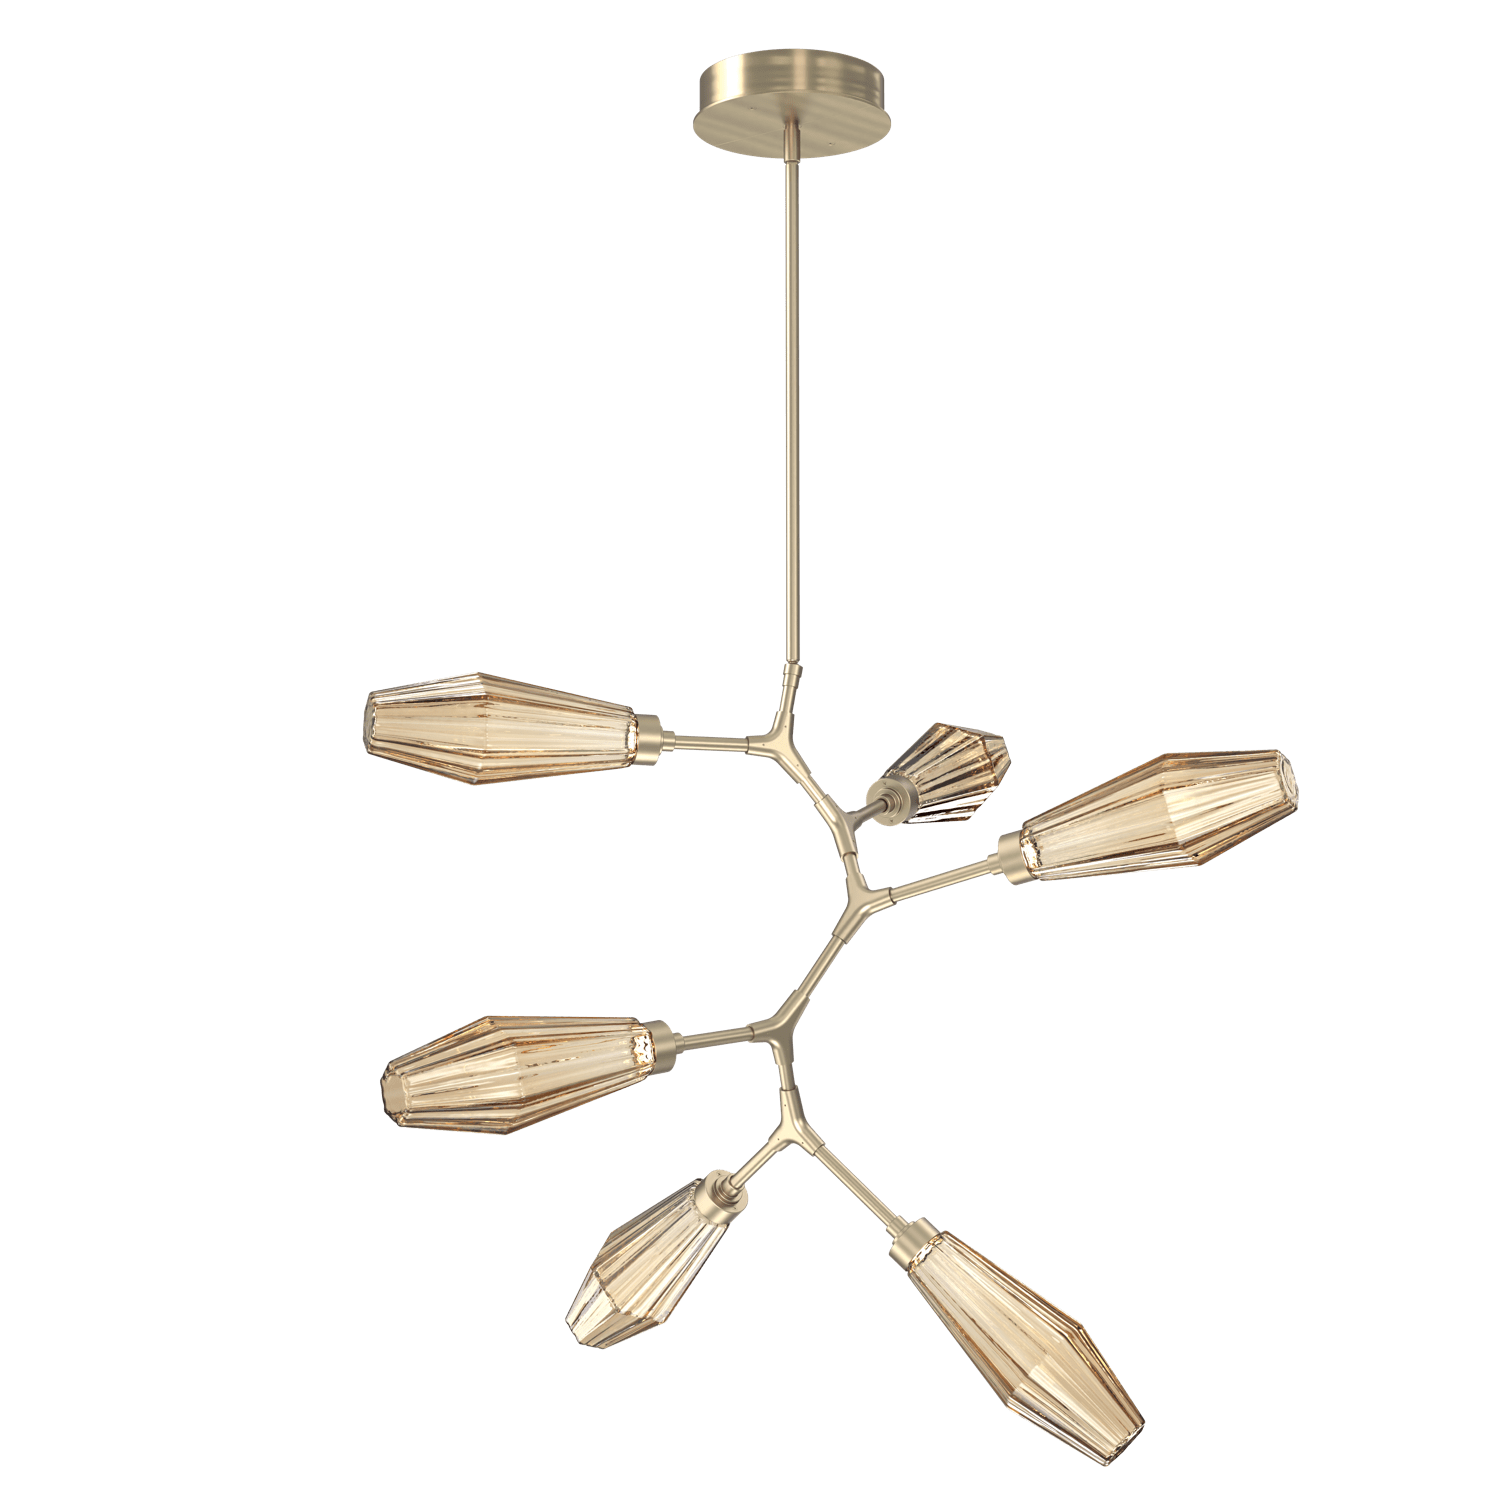 CHB0049-VA-HB-RB-Hammerton-Studio-Aalto-6-light-modern-vine-chandelier-with-heritage-brass-finish-and-optic-ribbed-bronze-glass-shades-and-LED-lamping